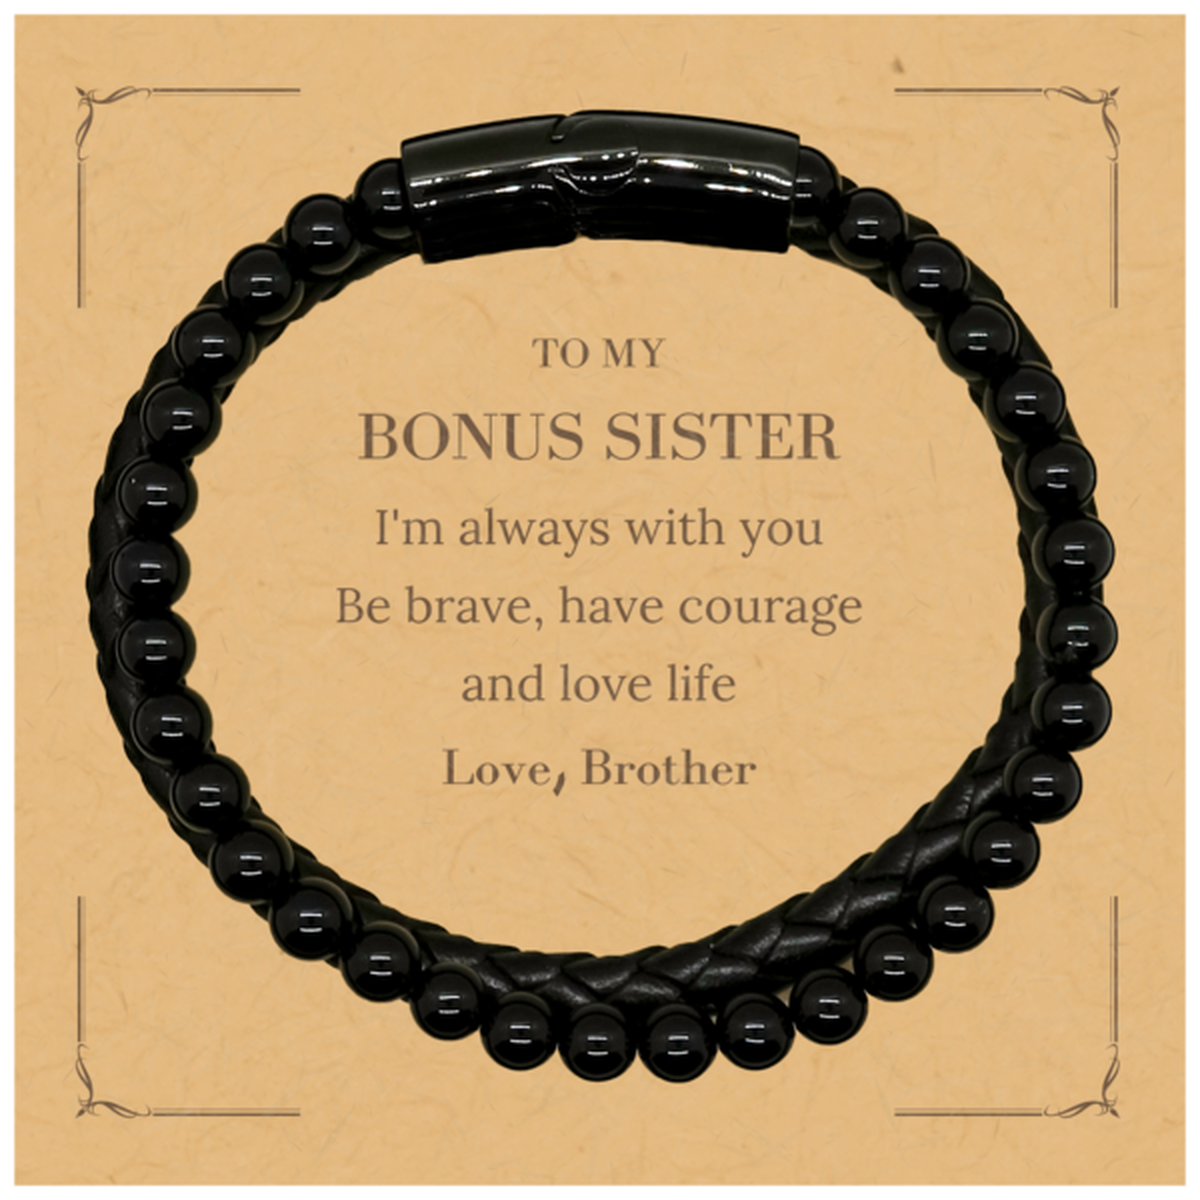 To My Bonus Sister Gifts from Brother, Unique Stone Leather Bracelets Inspirational Christmas Birthday Graduation Gifts for Bonus Sister I'm always with you. Be brave, have courage and love life. Love, Brother